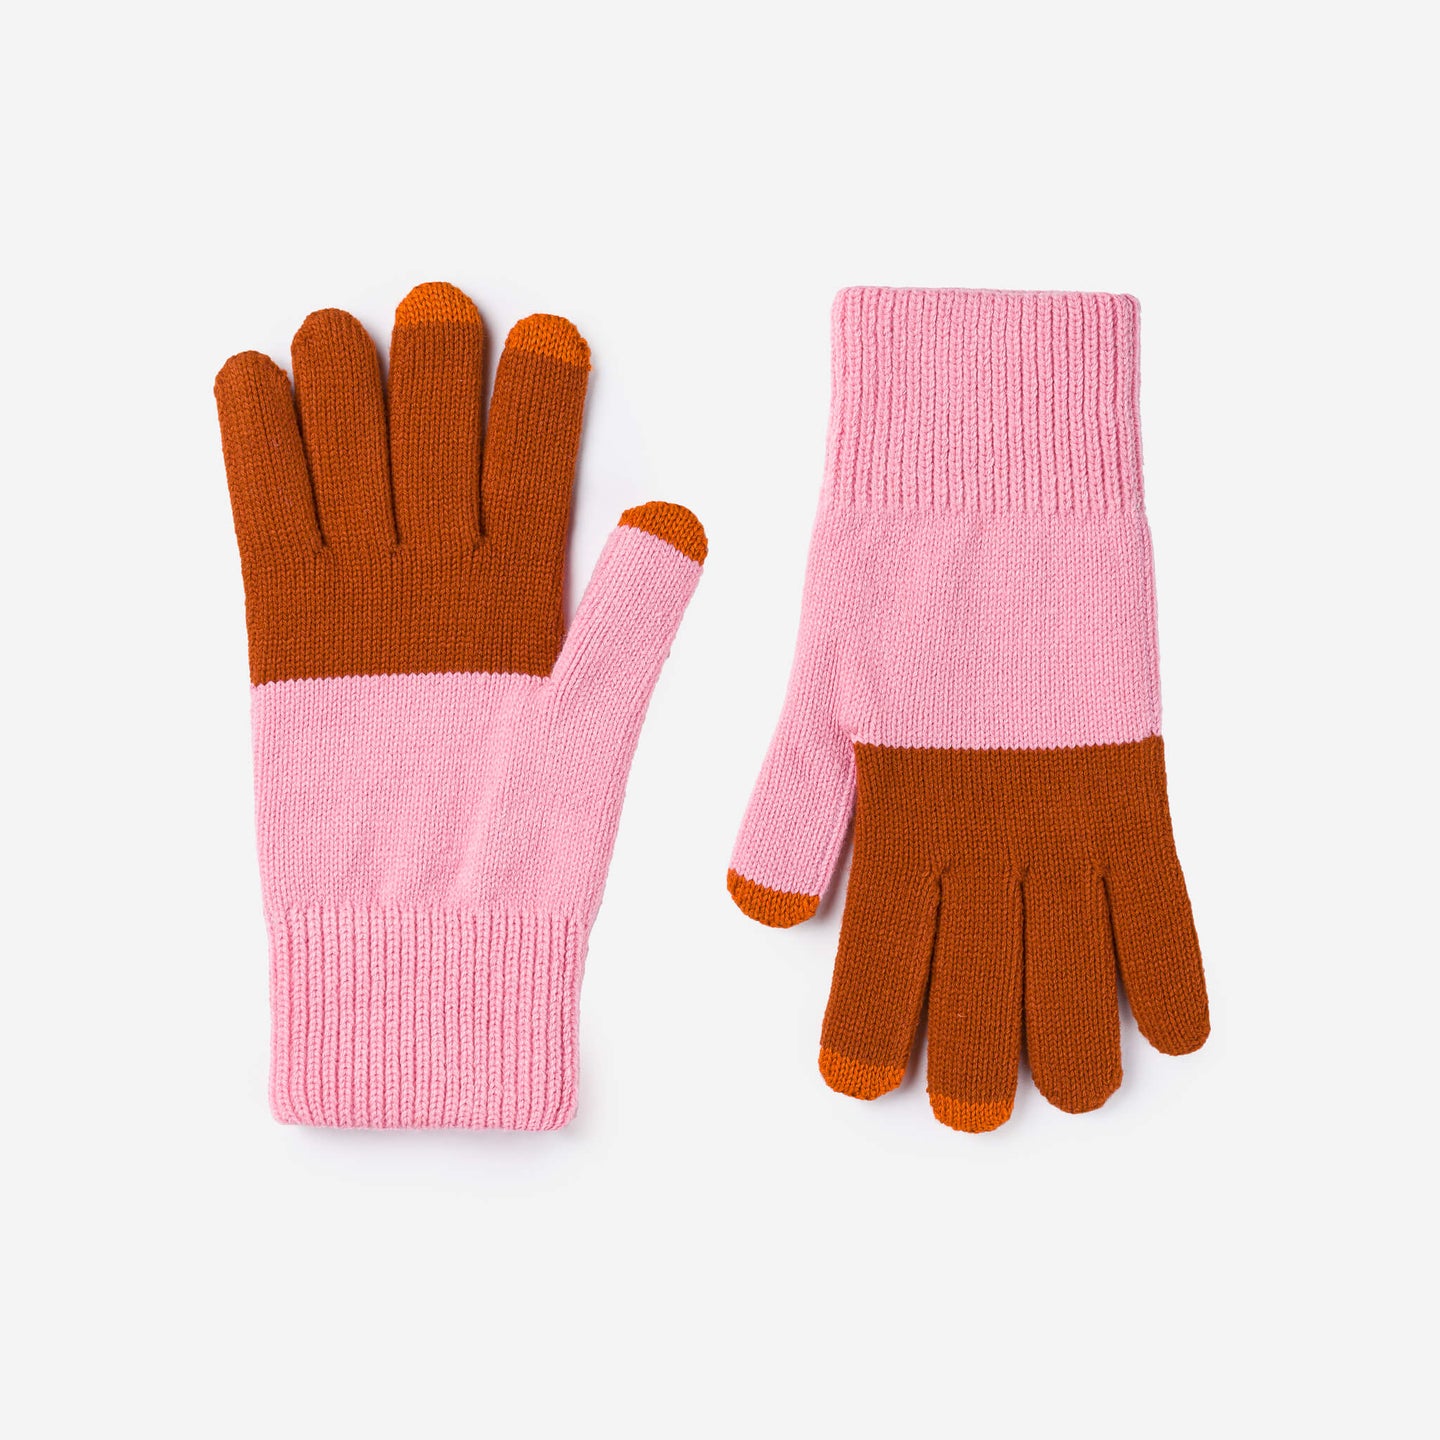 Colorblock Knit Touchscreen One Size Glove Colorful Fingertips Colorful Cute Girlie Gloves Holiday Gift